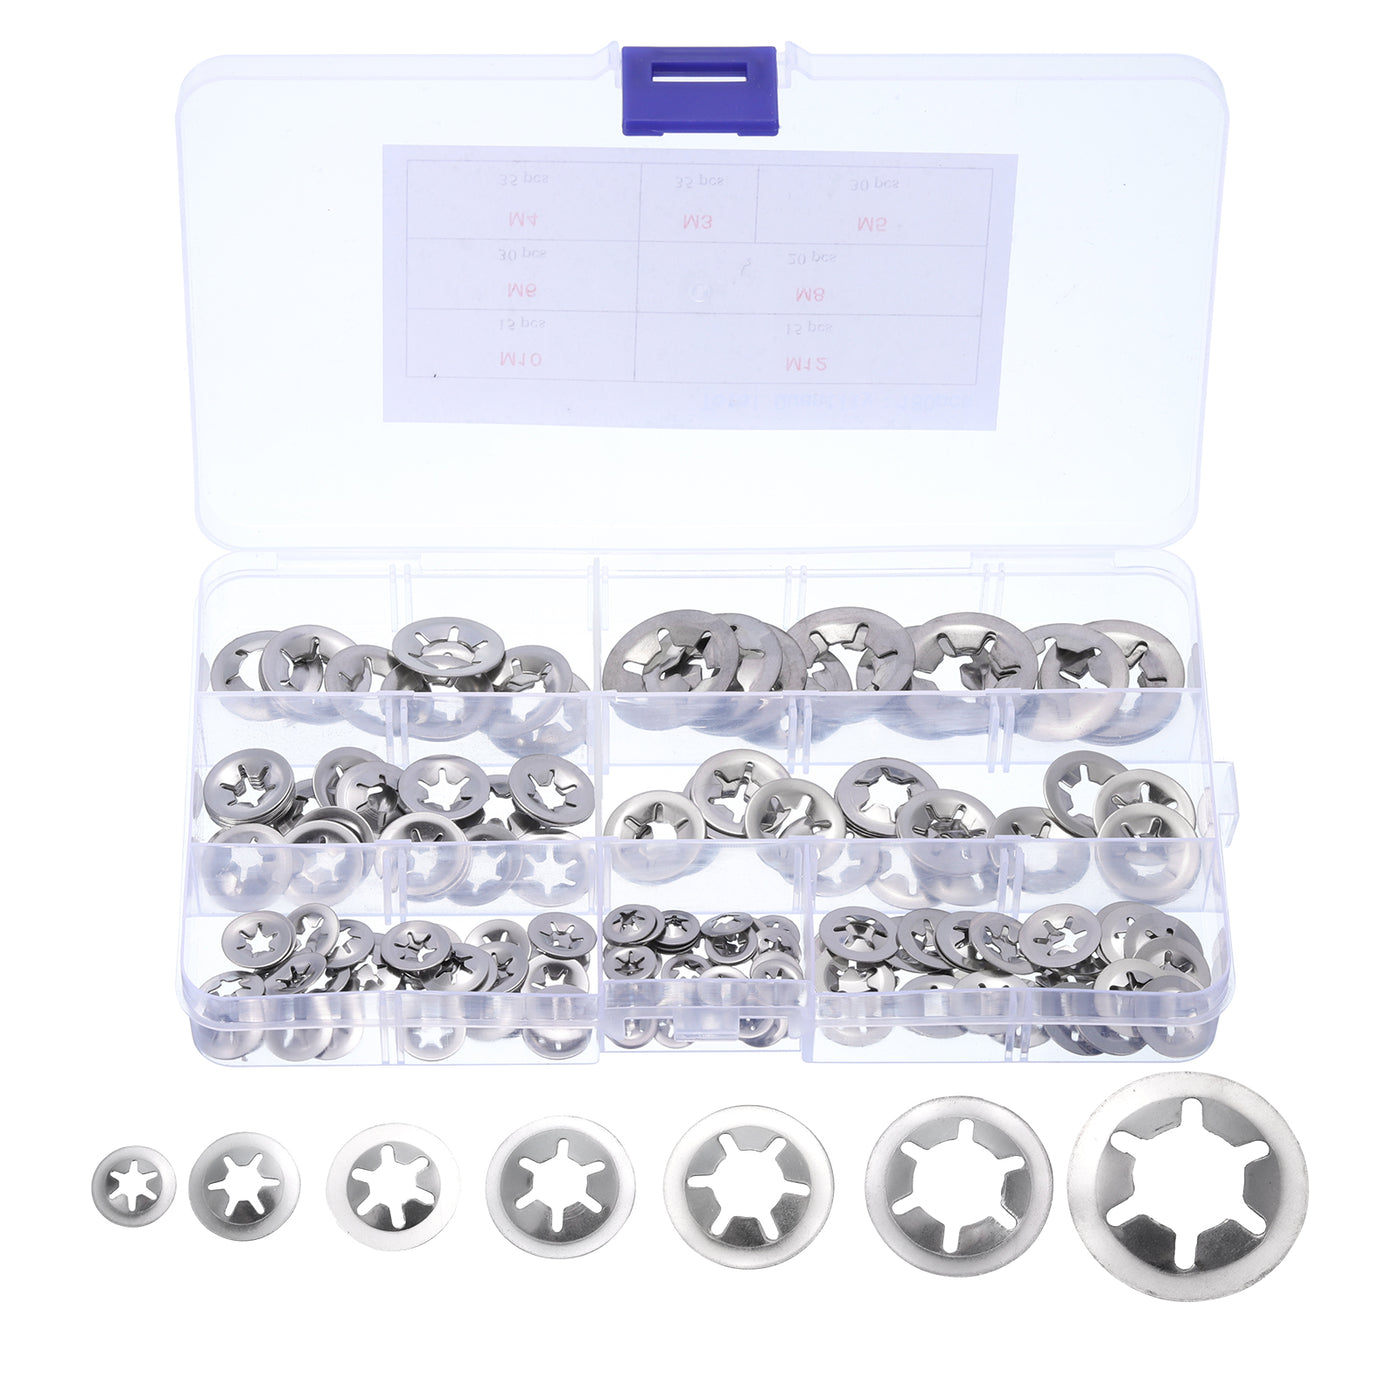 uxcell Uxcell 180pcs Internal Tooth Star Lock Washers M3 M4 M5 M6 M8 M10 M12, Stainless Steel